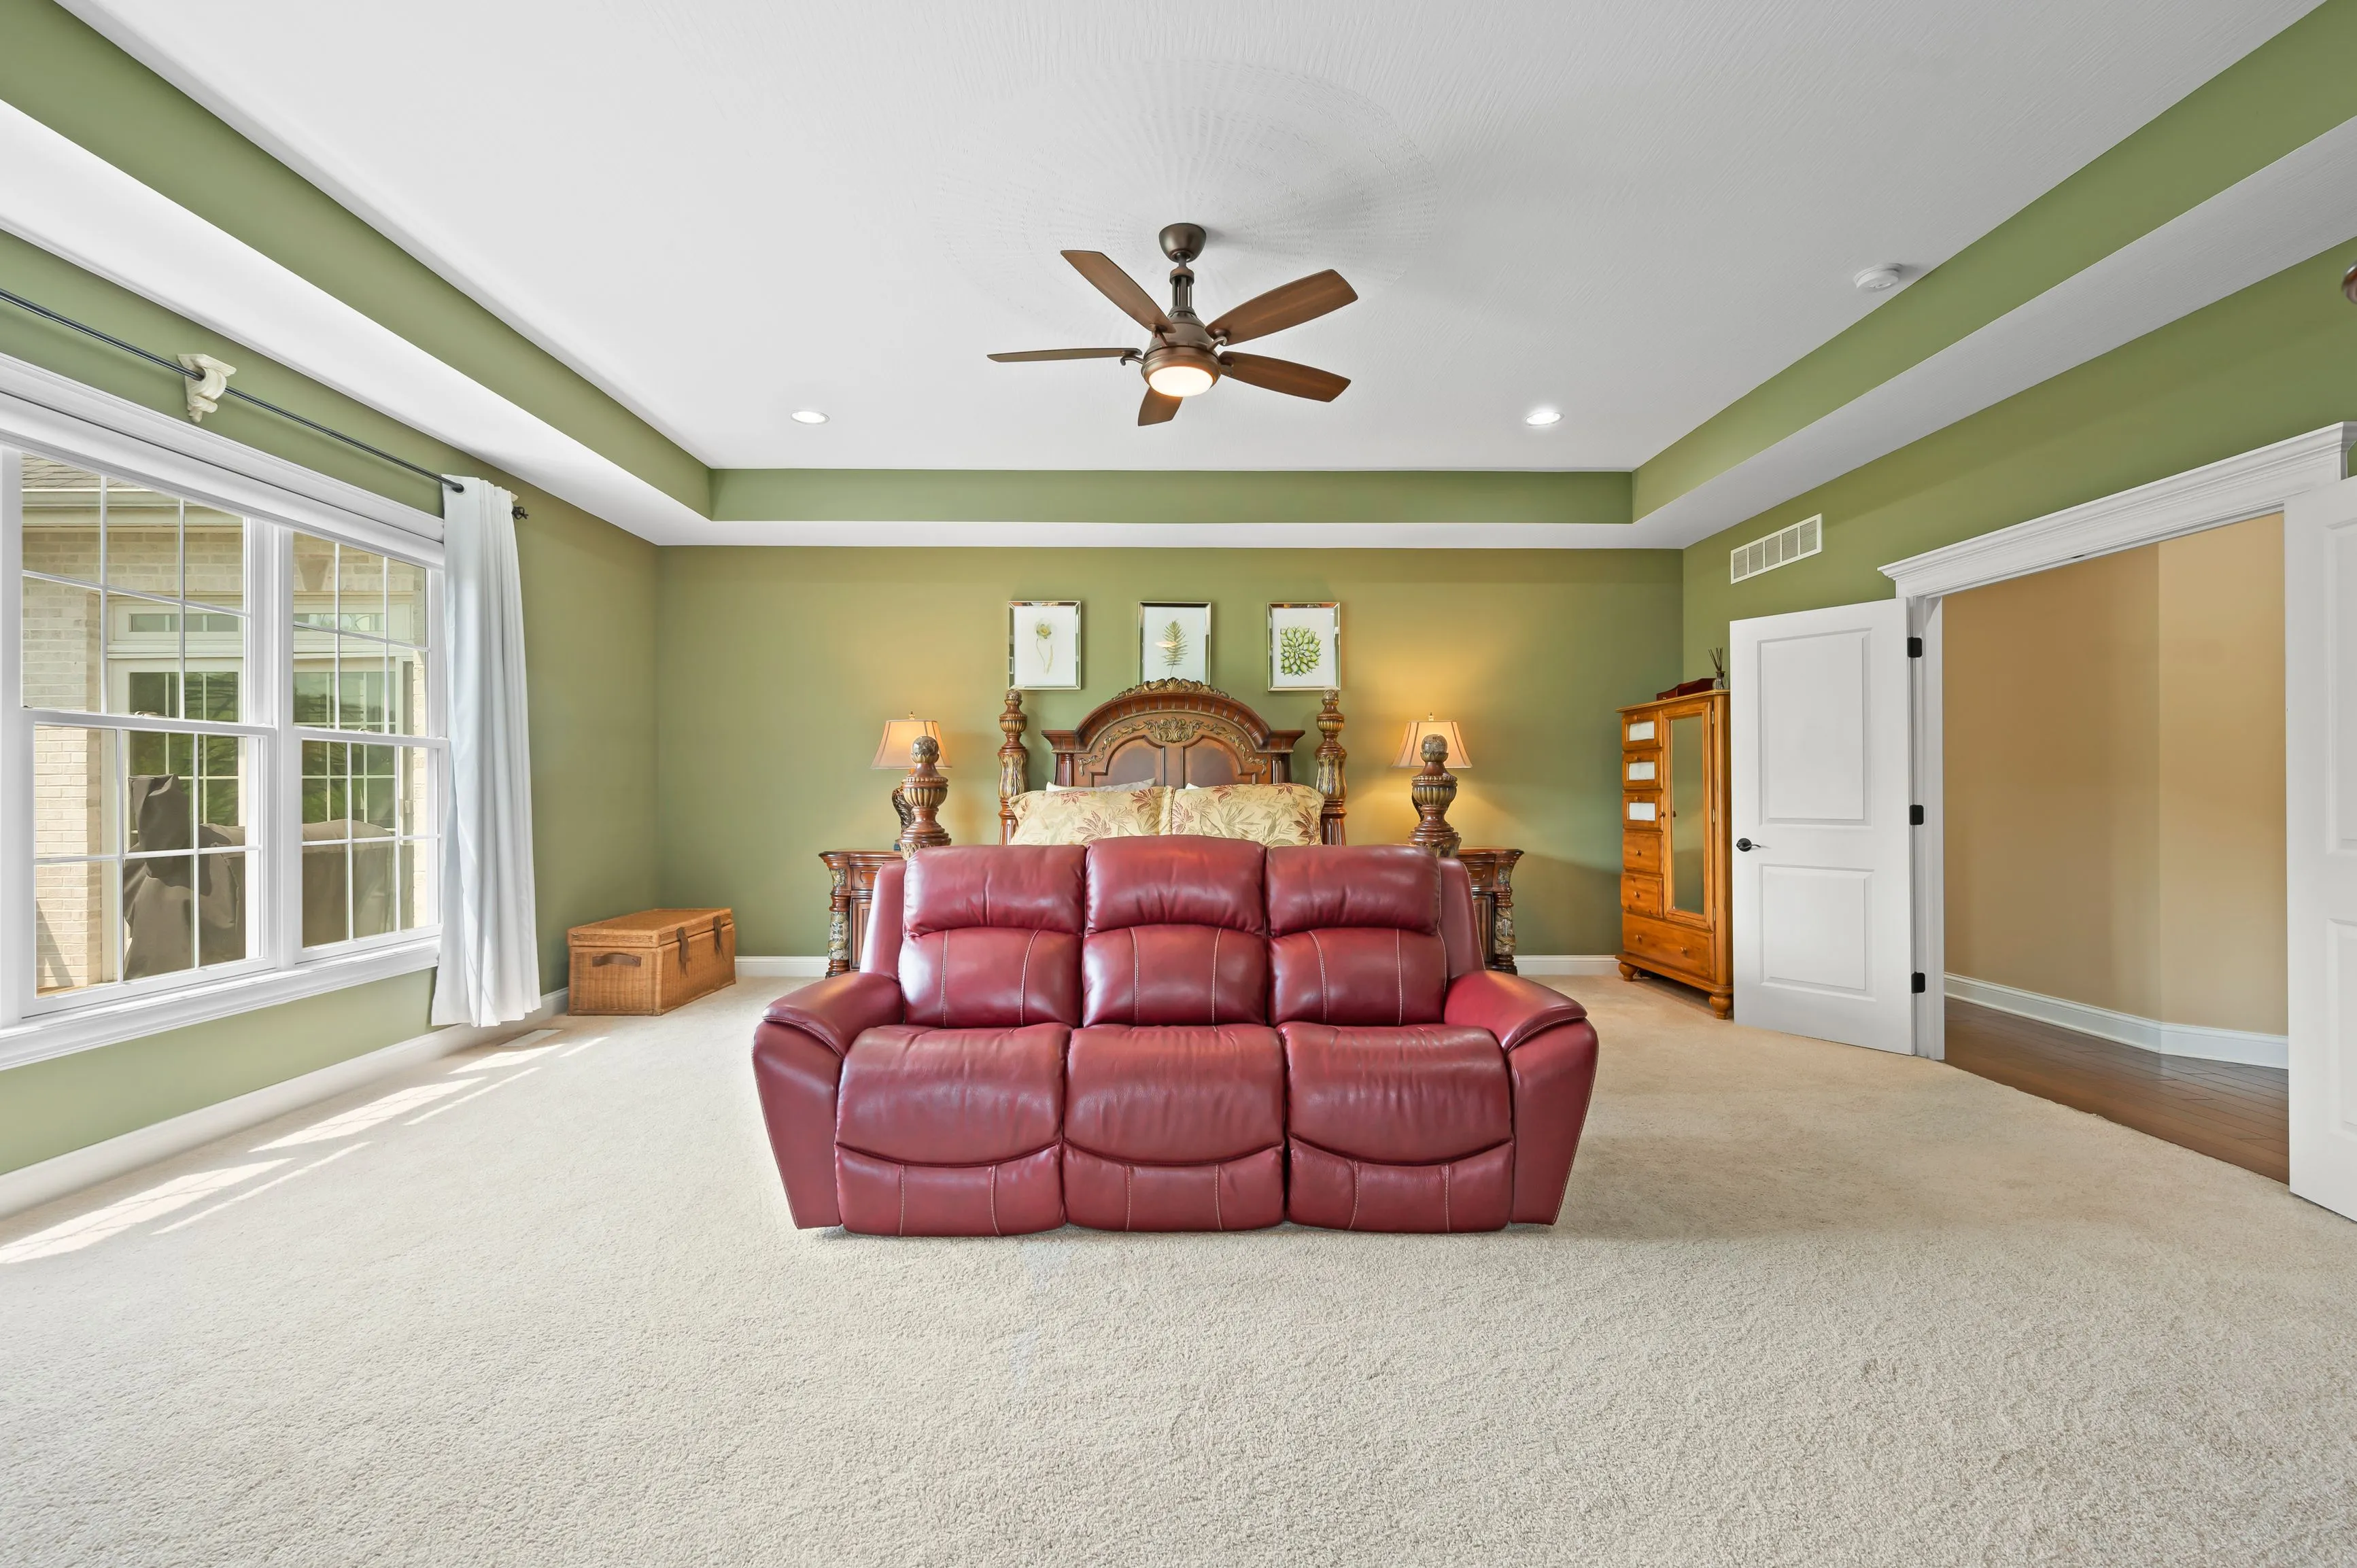 Spacious bedroom with green walls, large red leather sofa, wooden furniture, and a ceiling fan.